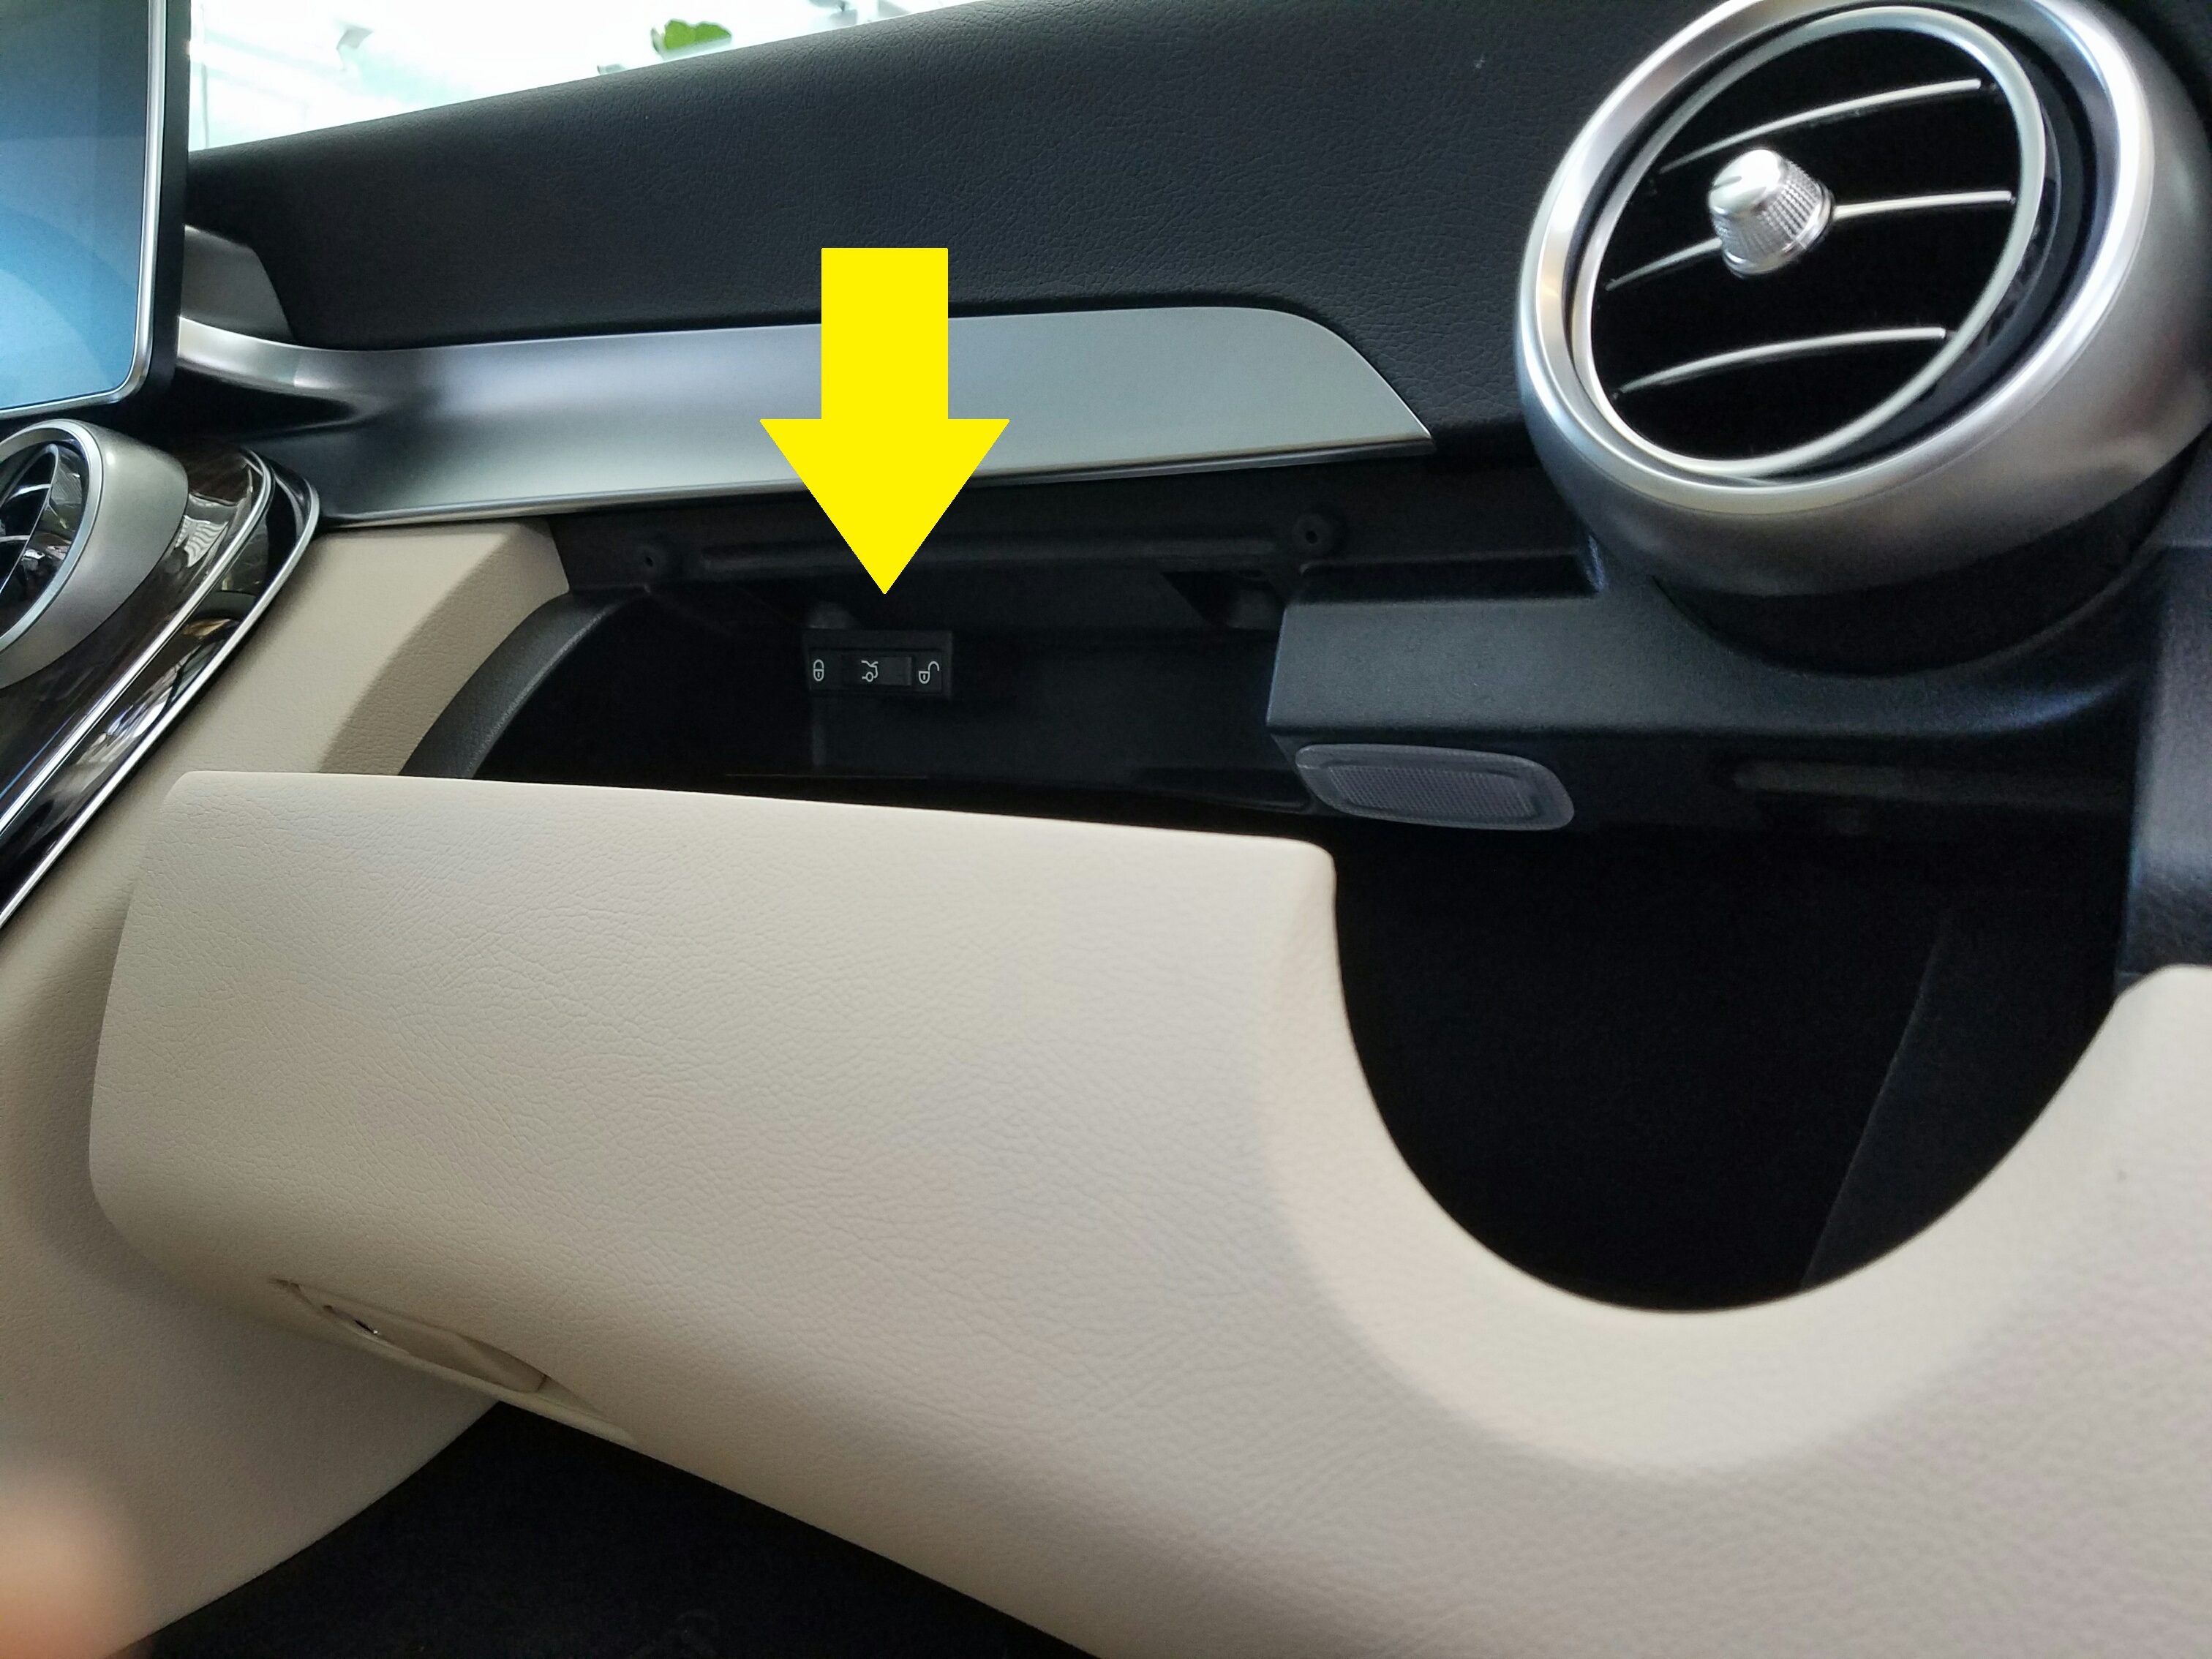 Mercedes-Benz Trunk Stuck? Why Your Trunk is Locked! – BenzBlogger